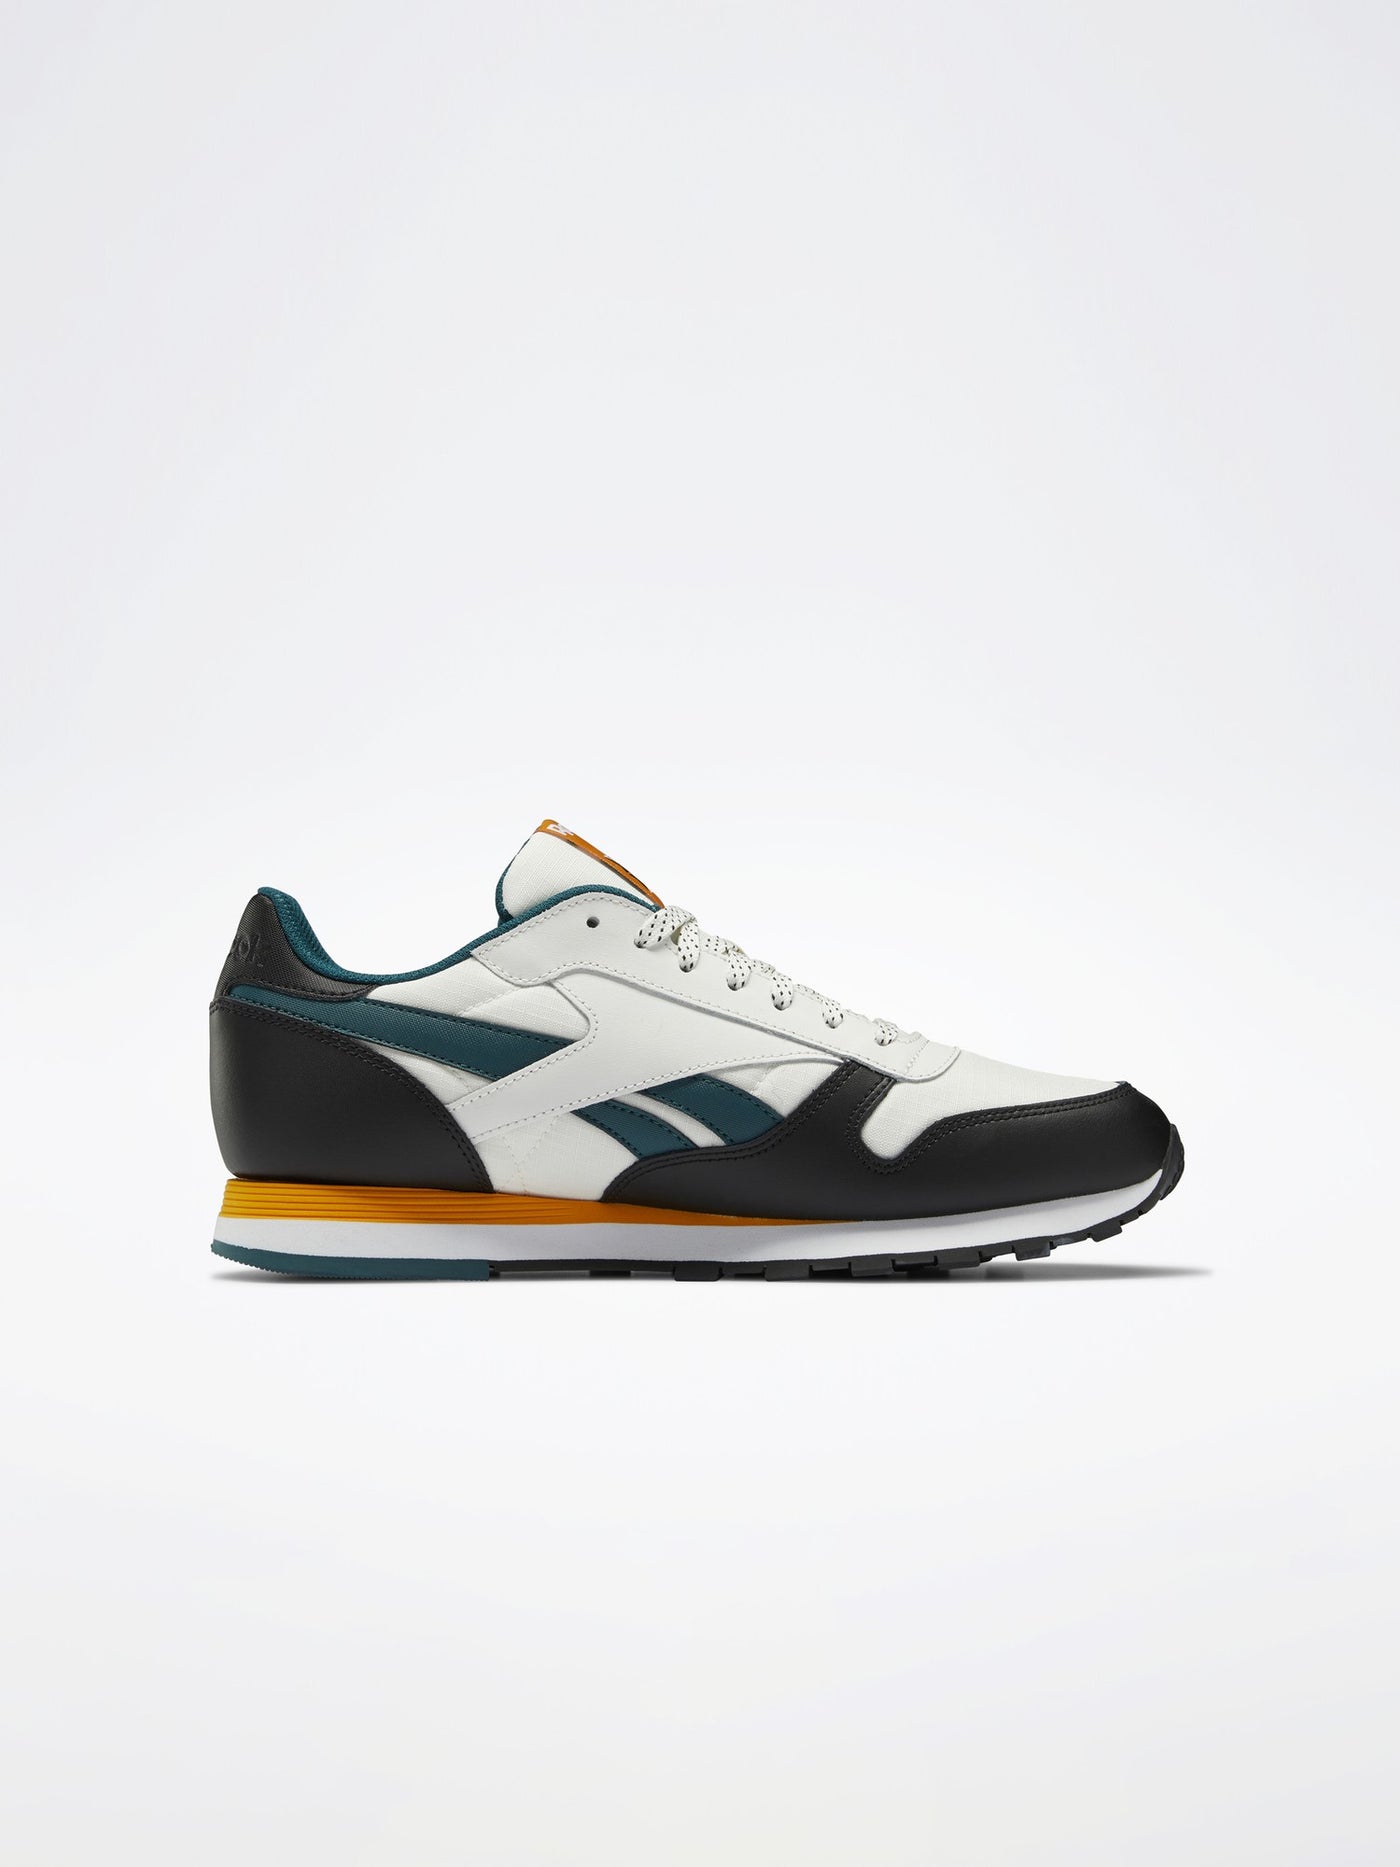 Reebok Mens Classic Leather Shoes - GY2619